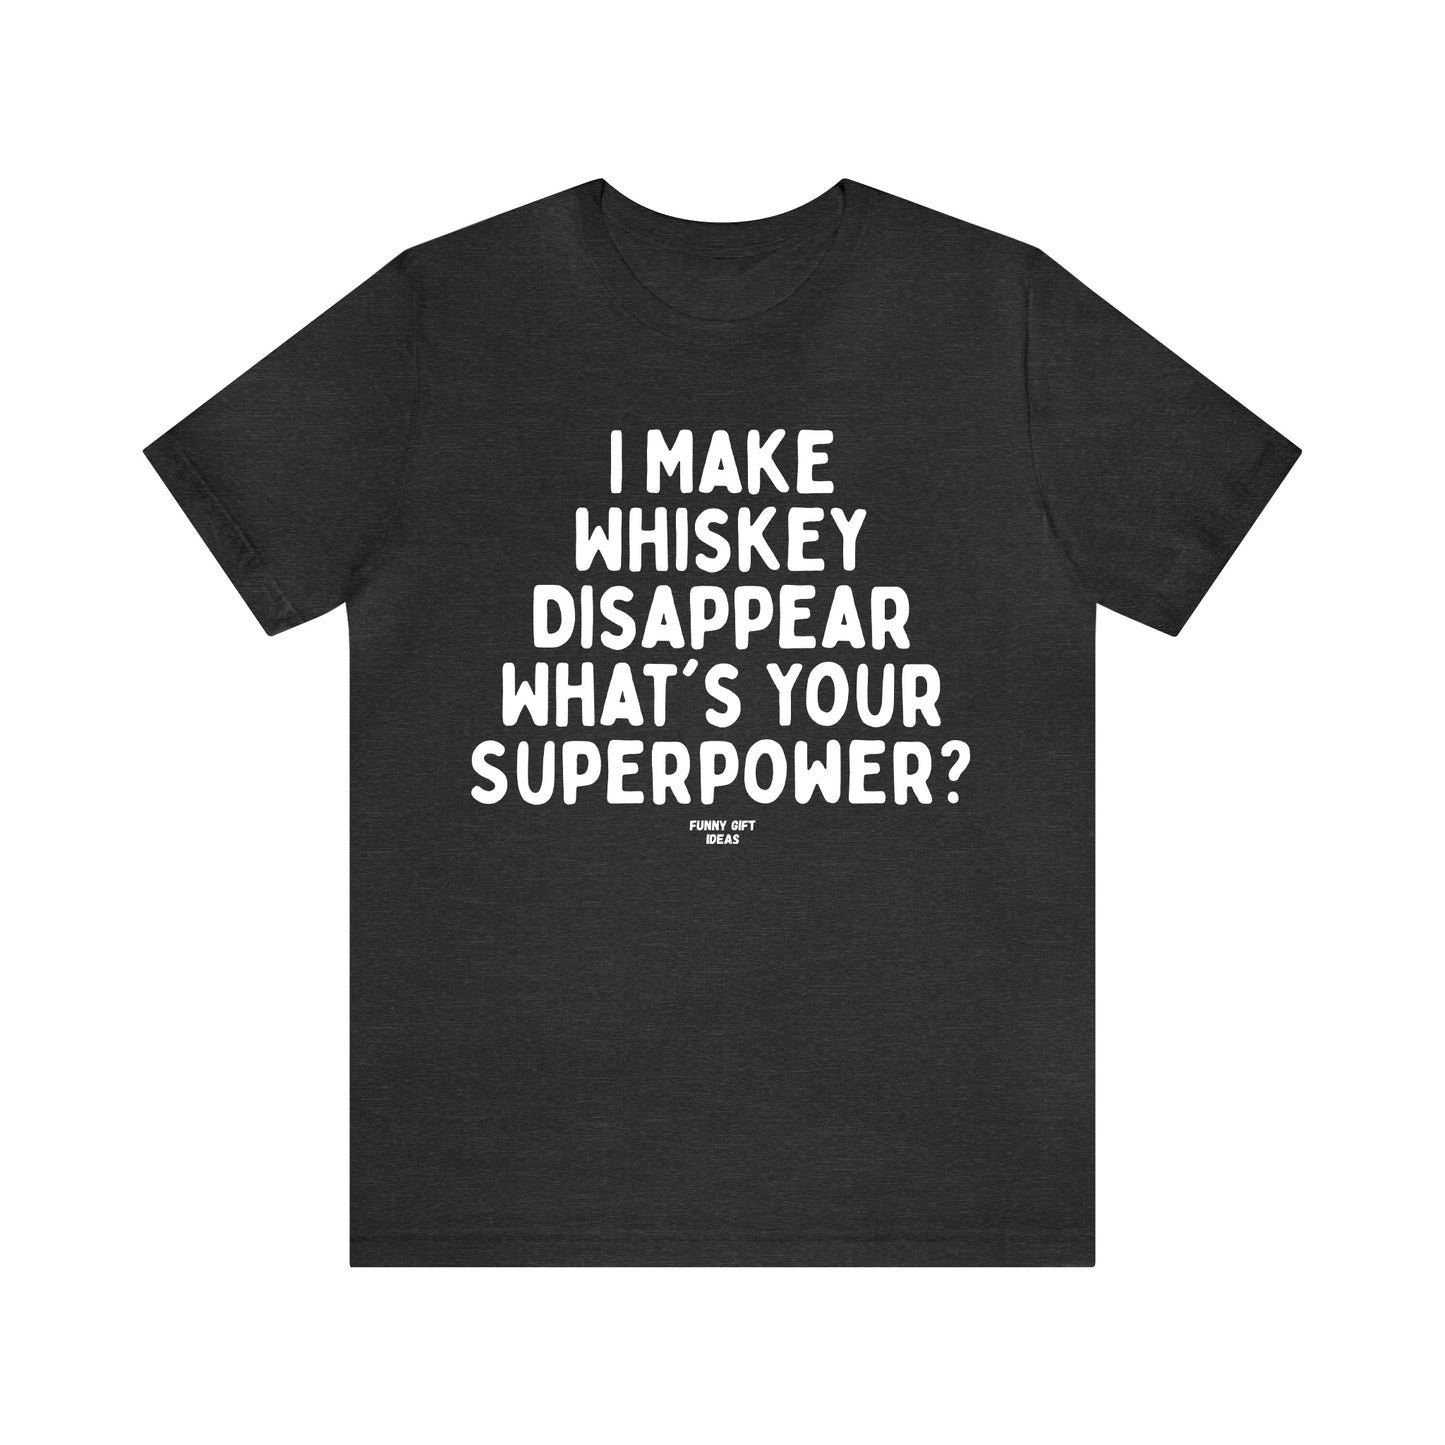 Funny Shirts for Women - I Make Whiskey Disappear What's Your Superpower? - Women's T Shirts